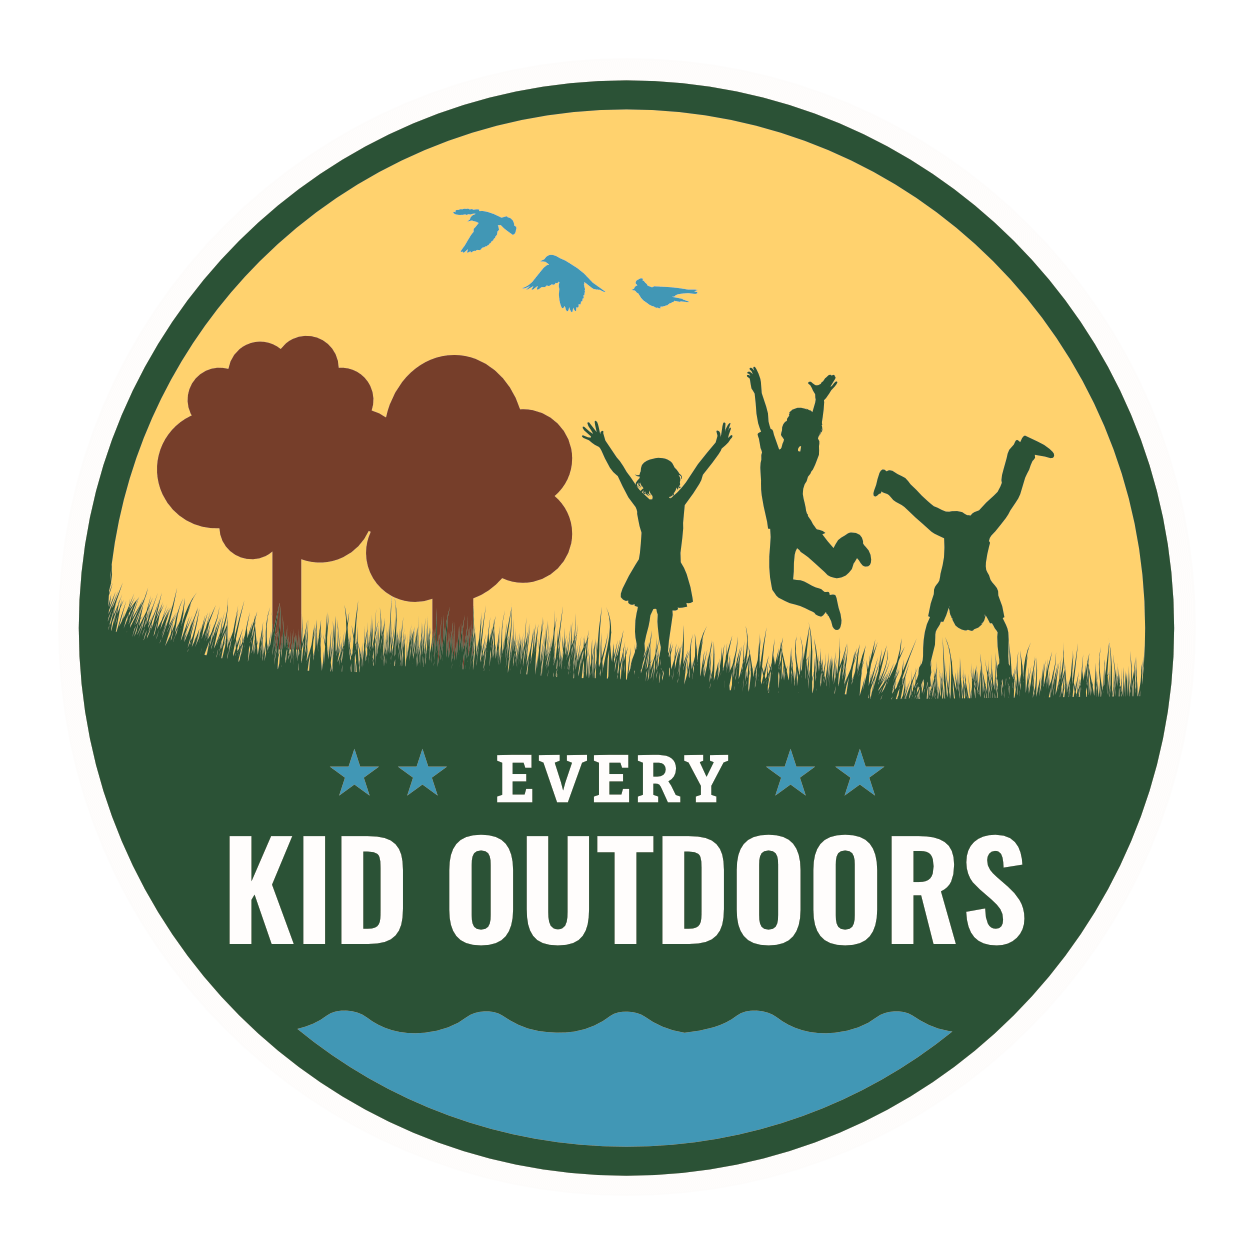 Every kid outdoors logo with three kids on grass, two trees and three birds